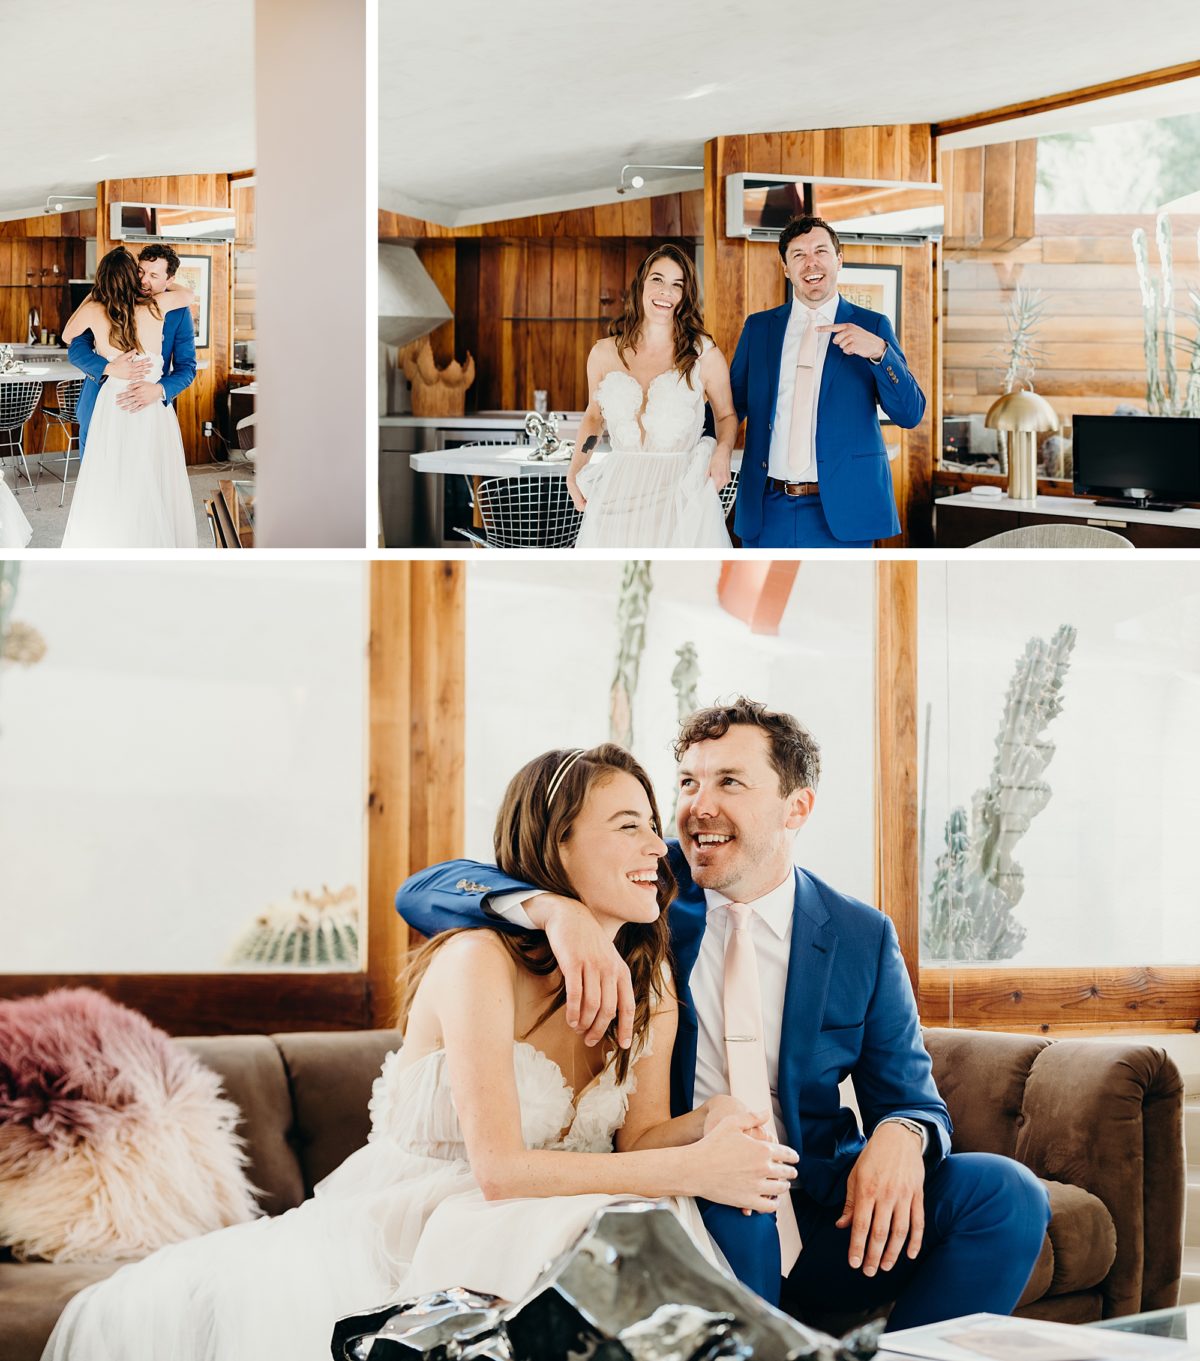 A first look in this John Lautner home in Desert Hot Springs, CA. Lautner Compound wedding captured by Briana Morrison